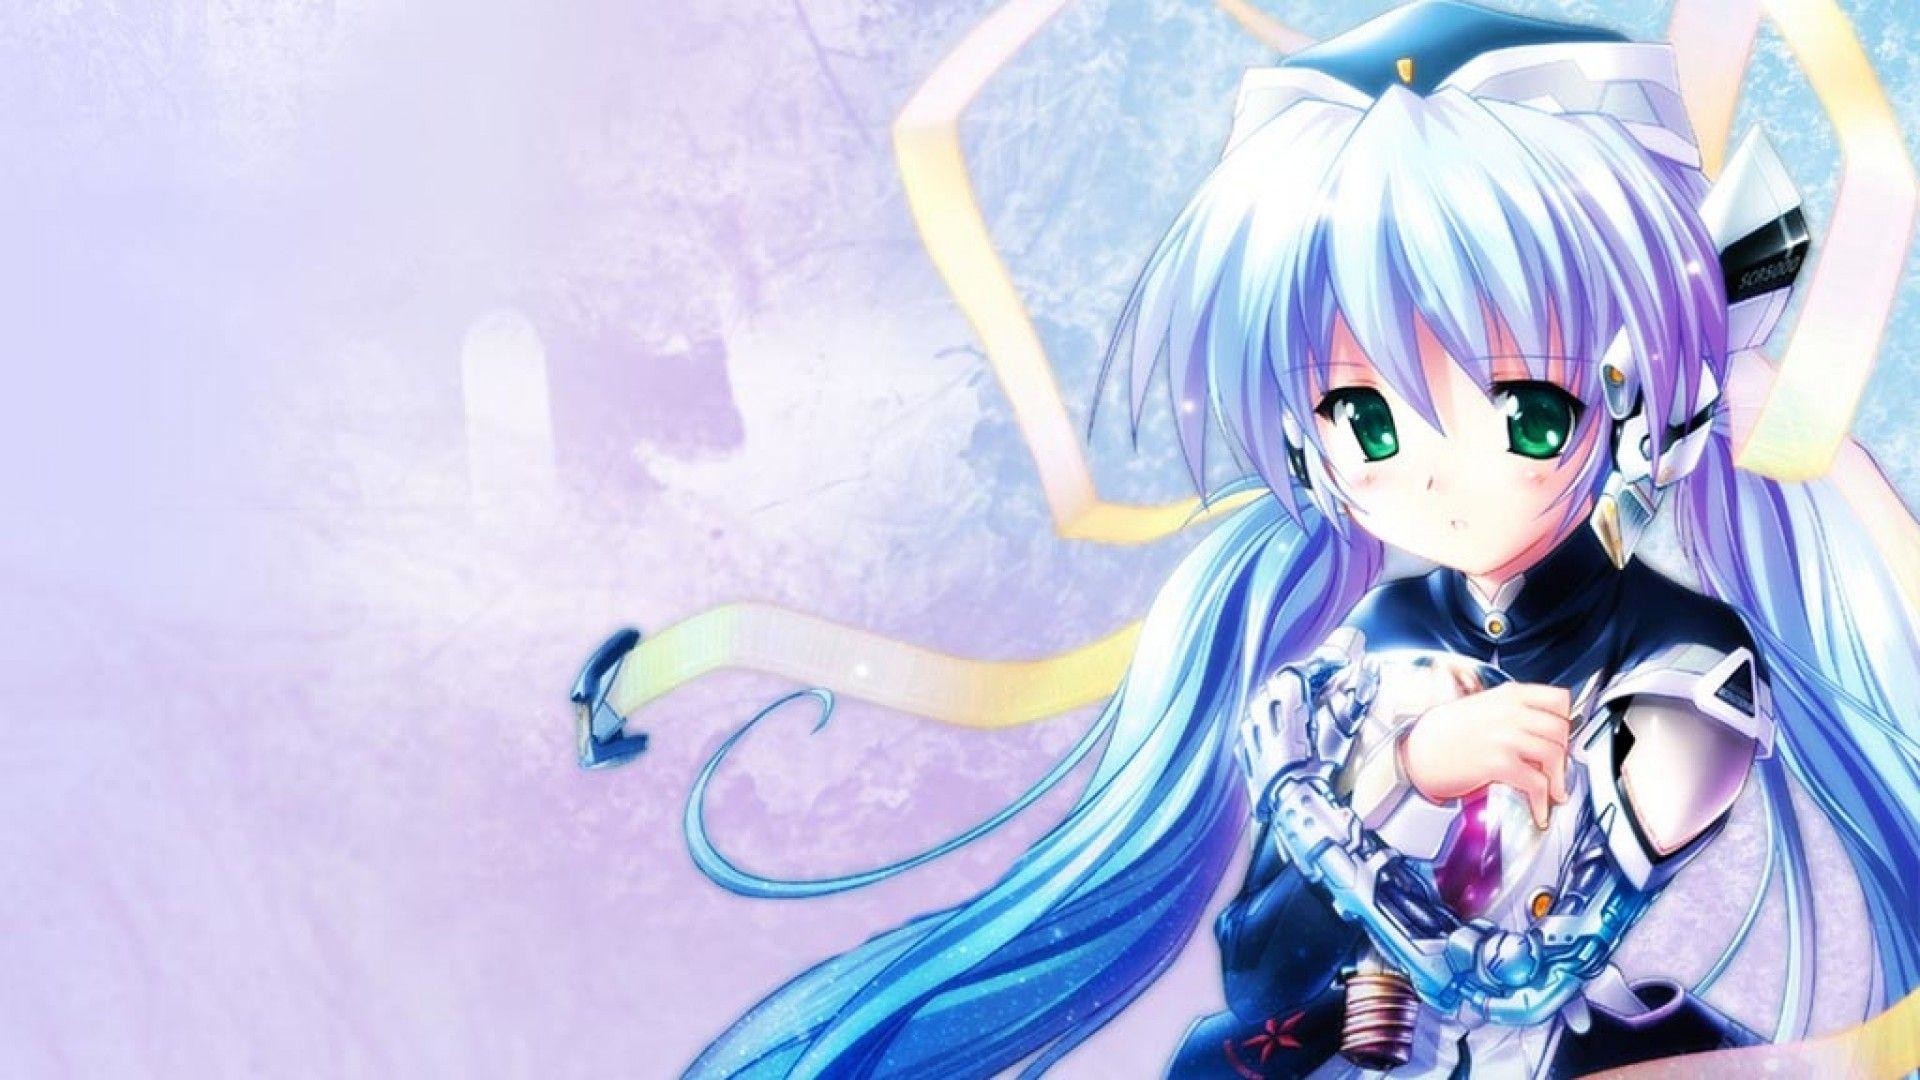 Cute Anime Wallpaper 1920x1080 (72+ images)